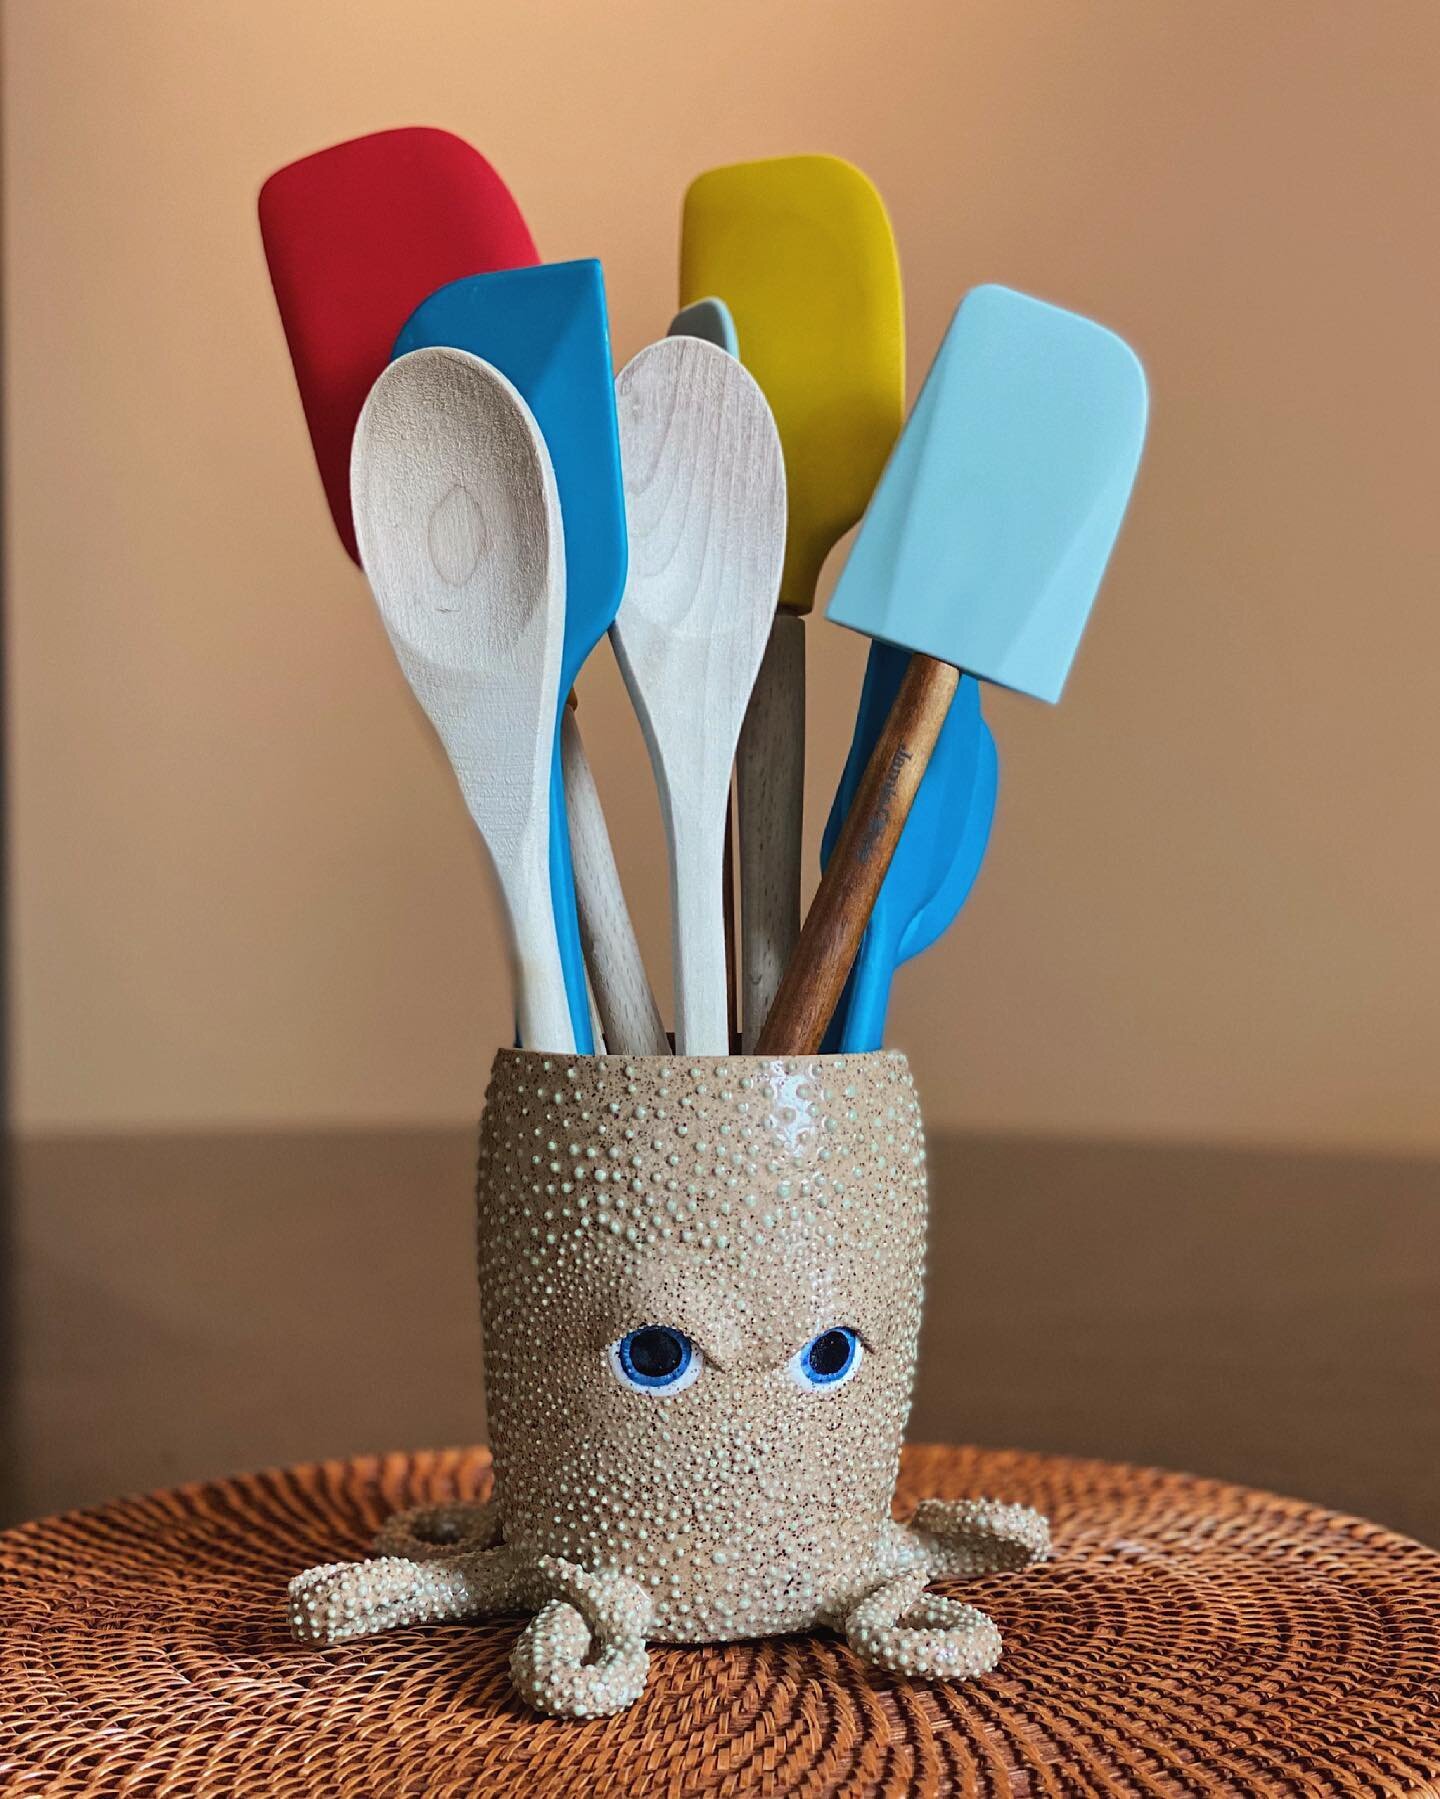 She&rsquo;s versatile. She can hold your spoons too 

(Sold)
&bull;
&bull;
&bull;
&bull;
&bull;
&bull;
#companycreature #blueeyes #speckledclay #ceramicvase #handmade #utensilholder #ceramicsofinstagram #productphotography